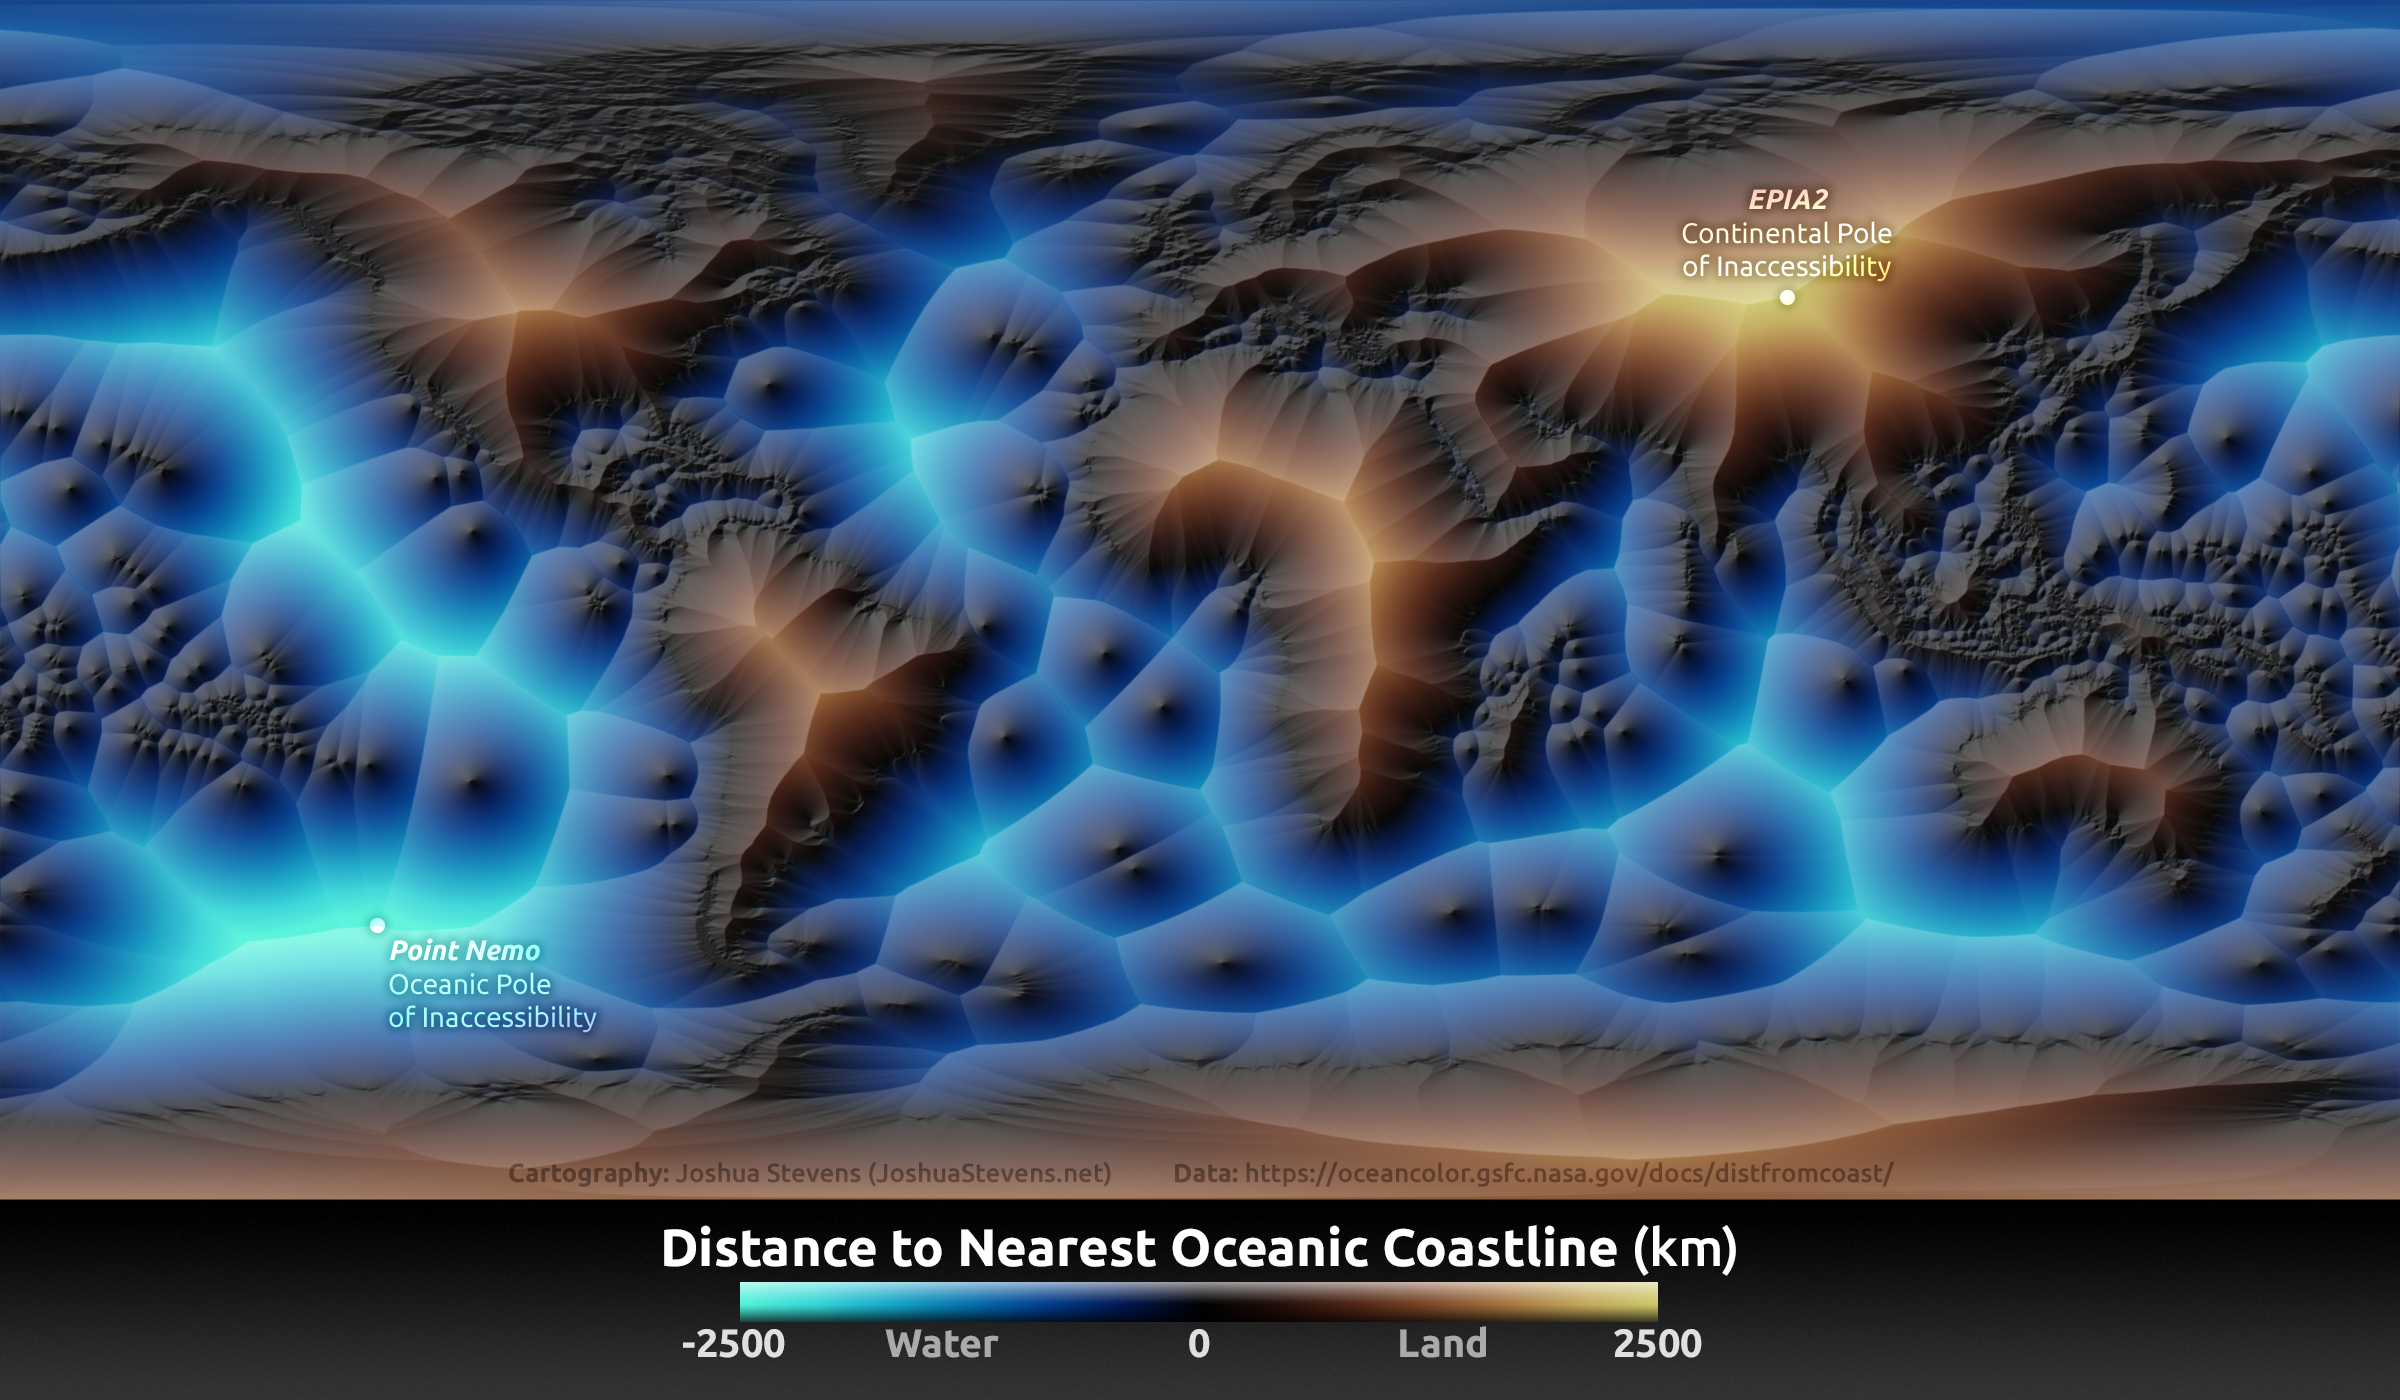 Nearest distance to coast shown with the aid of color and relief. The points most remote to the shore (at land and at sea) are indicated (oceanic and continental poles of inaccessibility). Photo: Joshua Stevens (https://www.joshuastevens.net/blog/mapping-the-distance-to-the-nearest-coastline/).